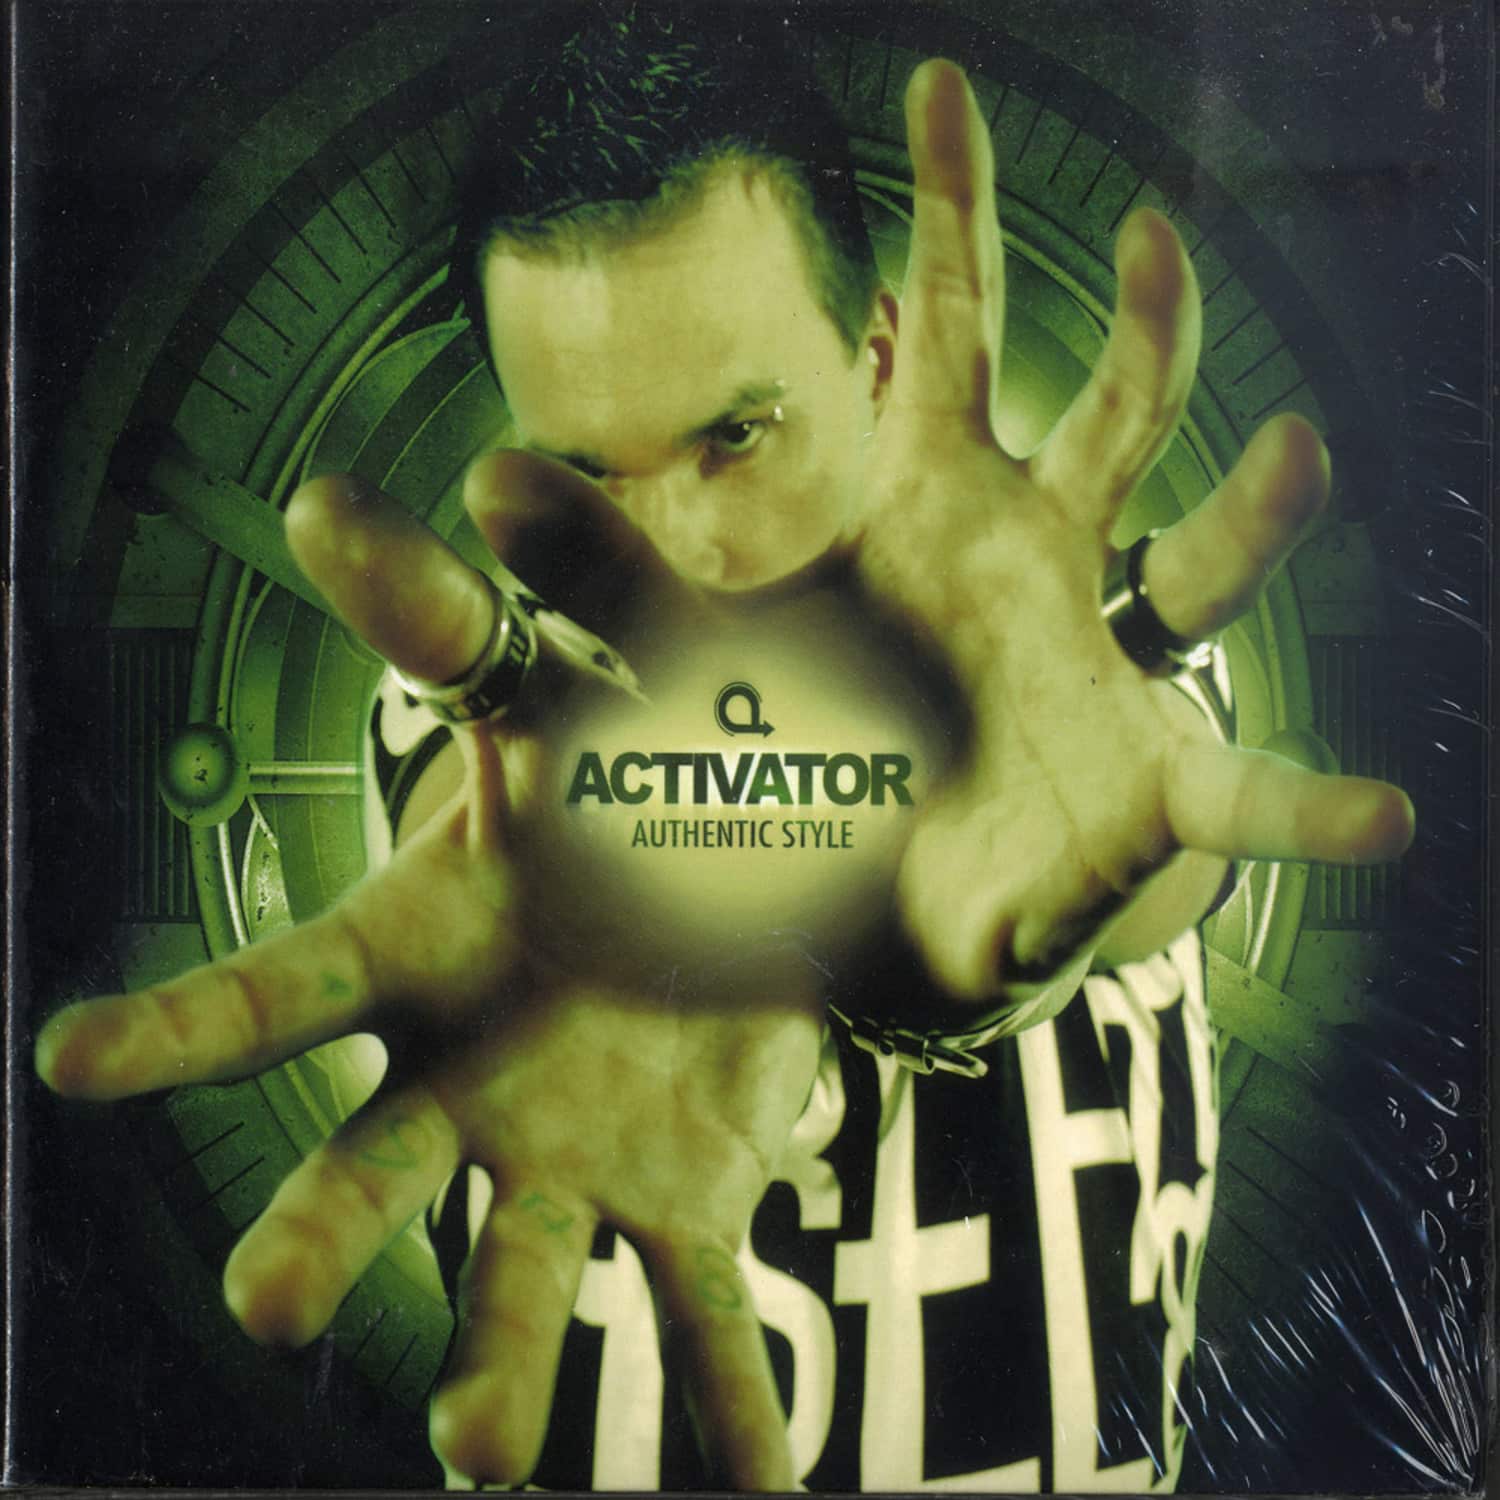 Activator - AUTHENTIC STYLE 